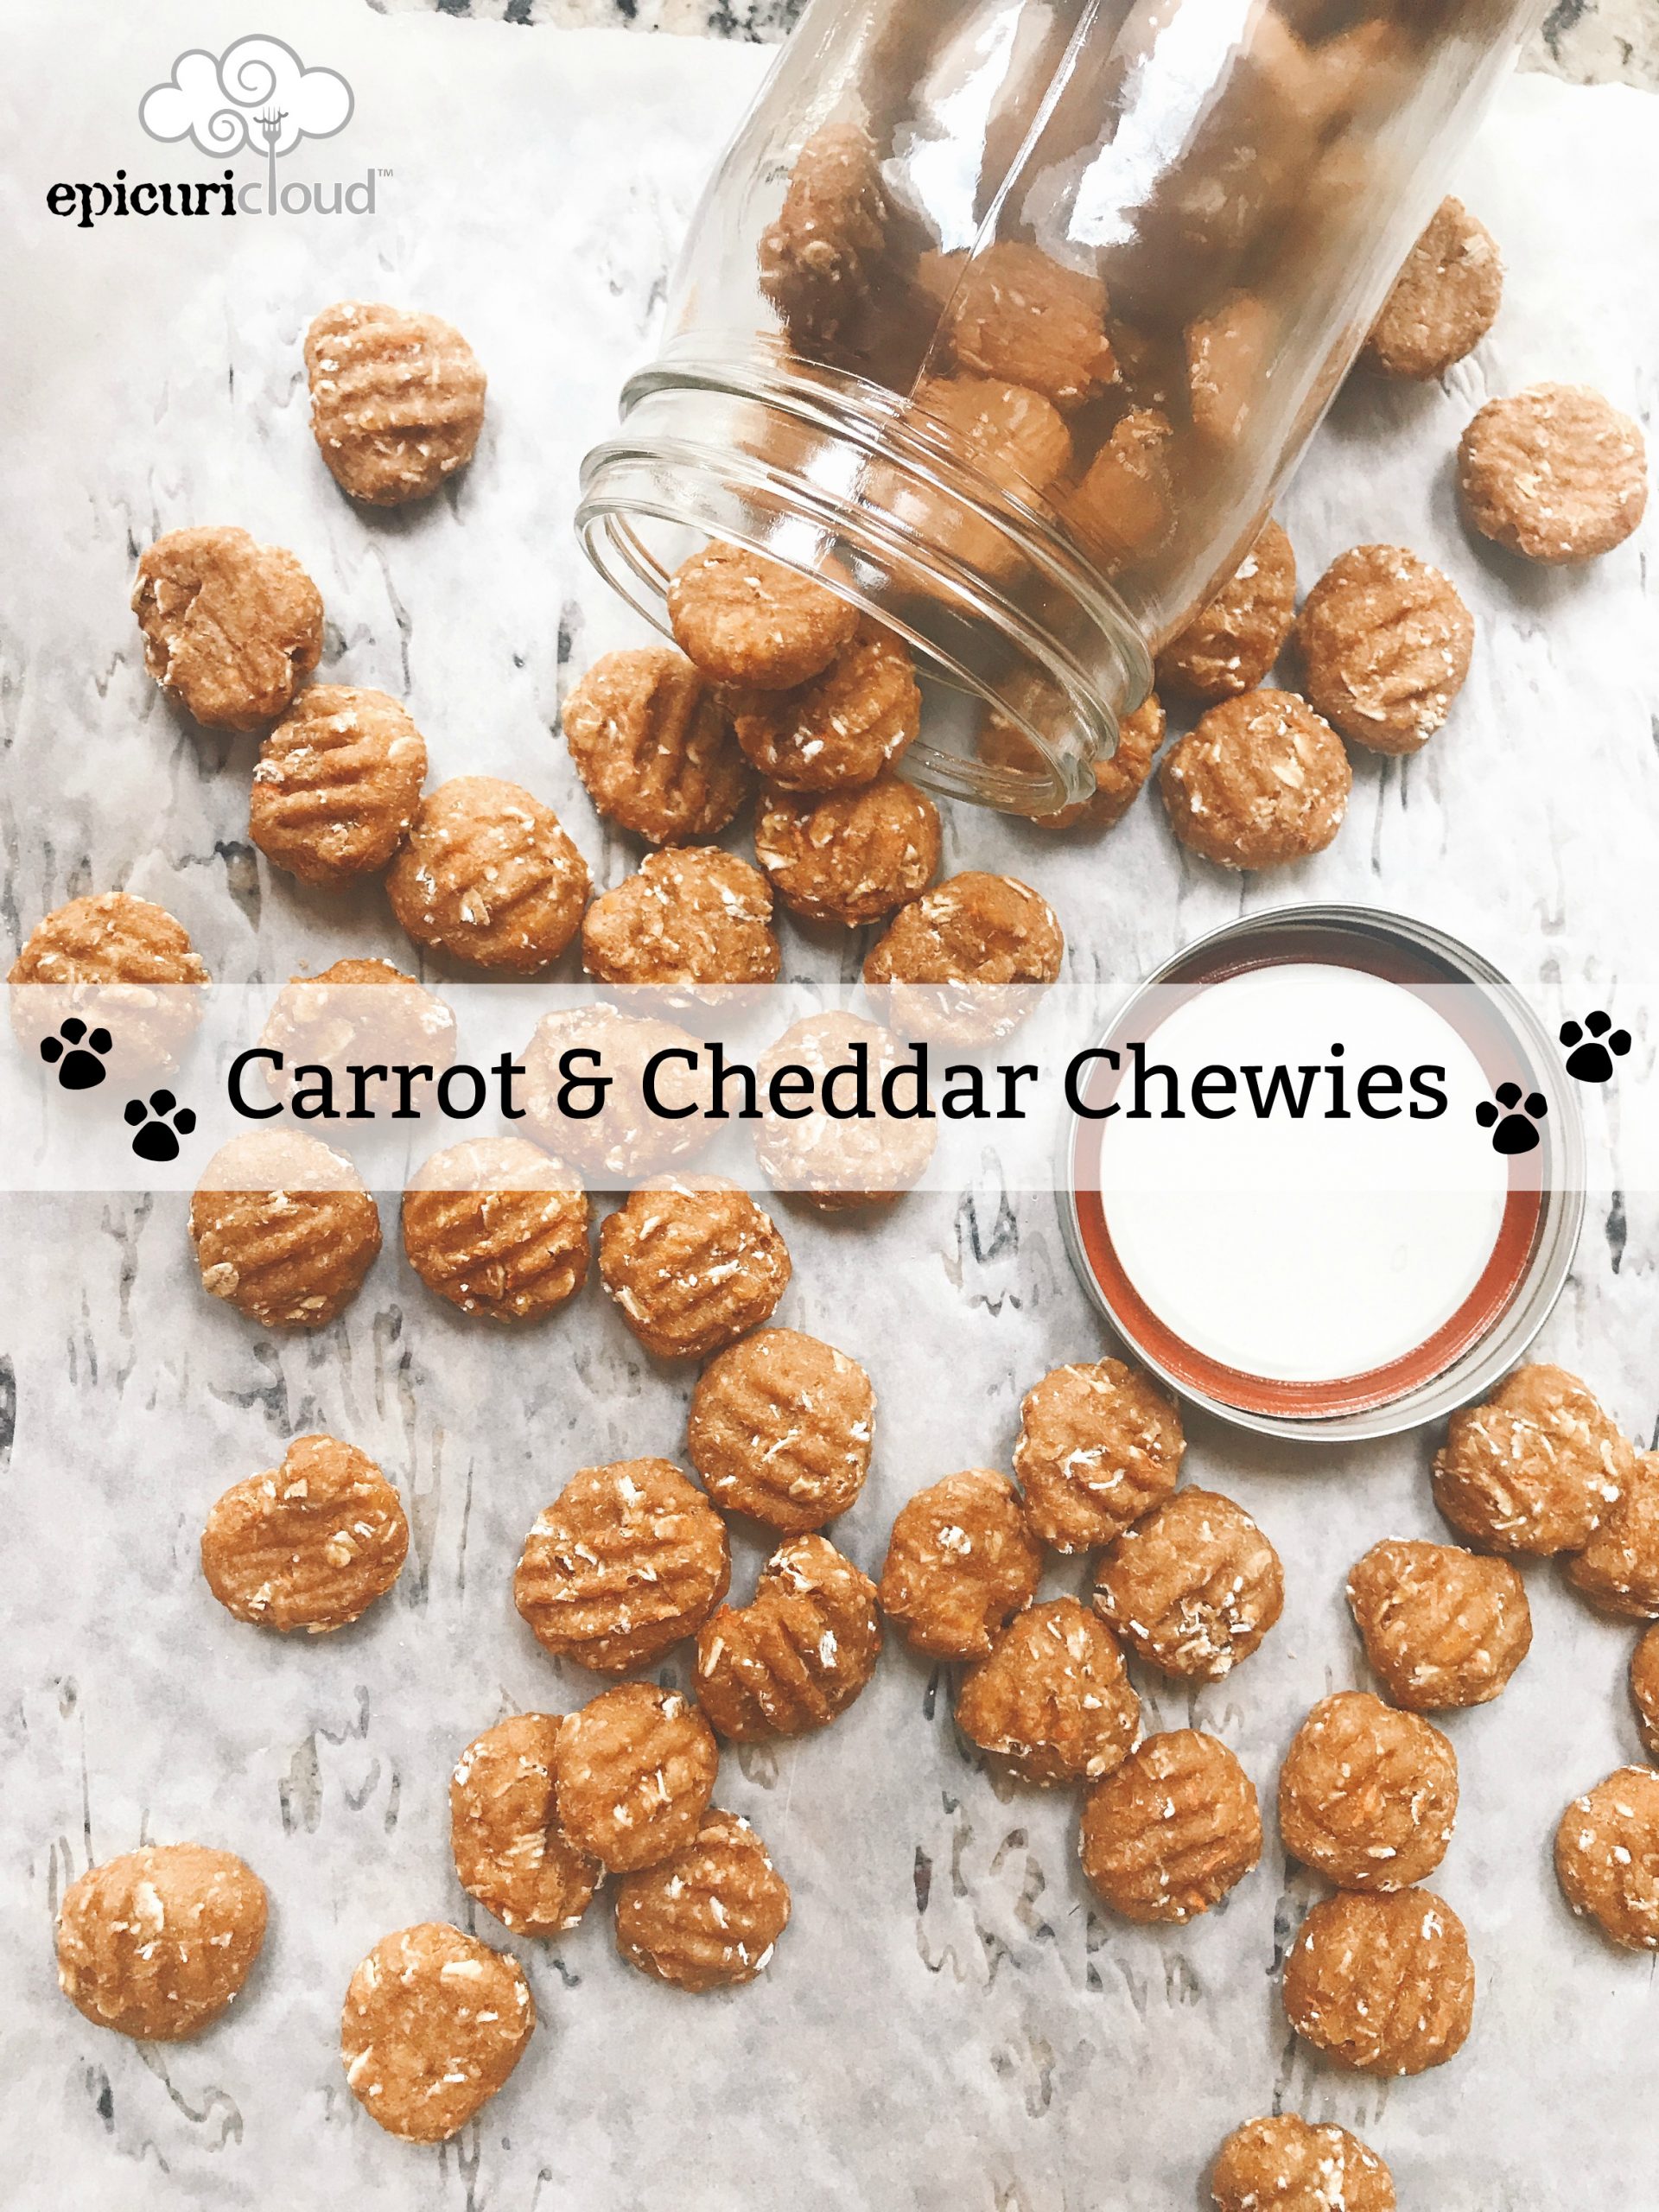 Carrot and Cheddar Chewies